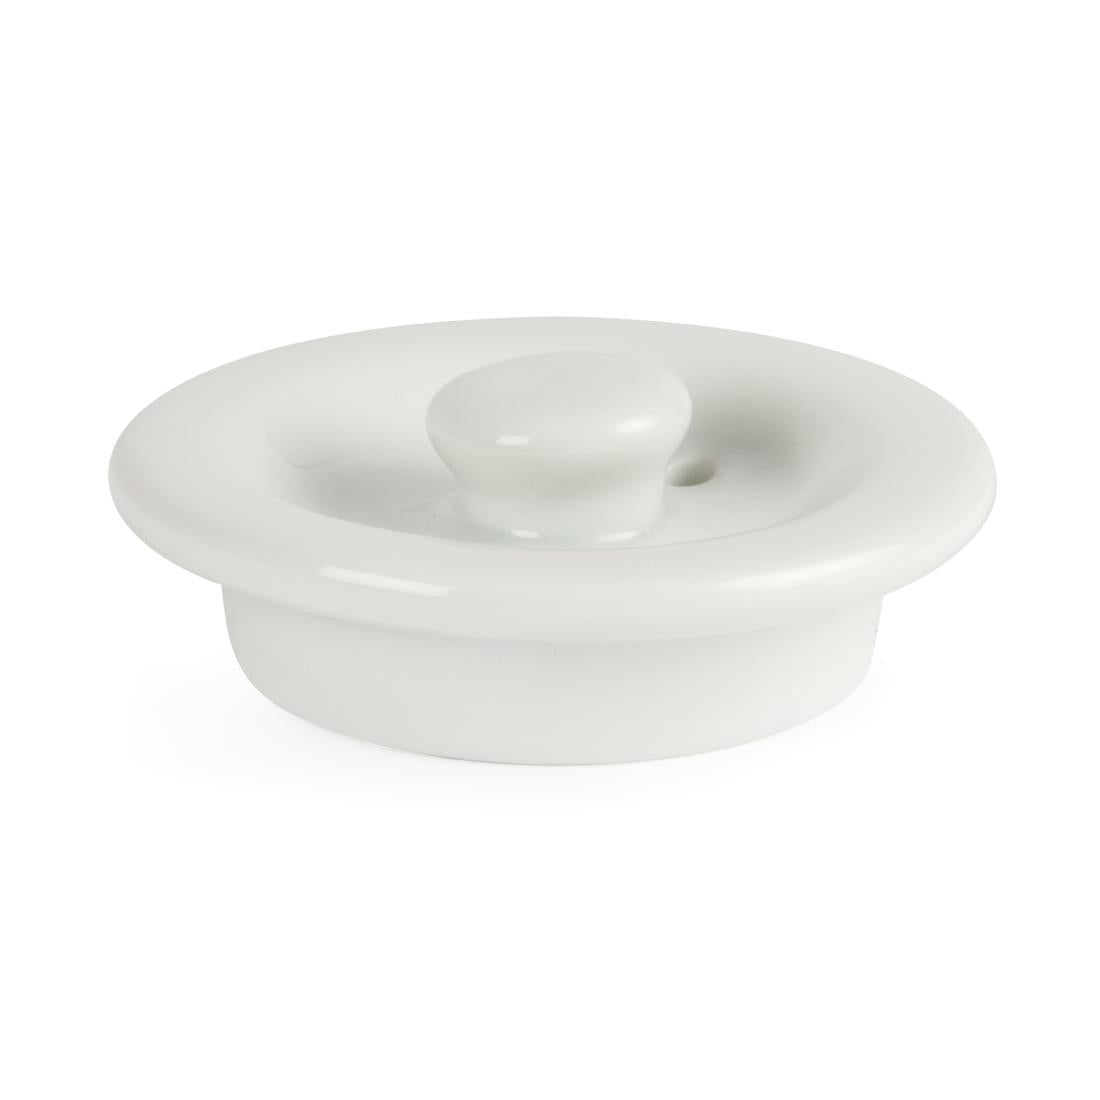 DP992 Lids For Olympia Whiteware 852ml Teapots JD Catering Equipment Solutions Ltd